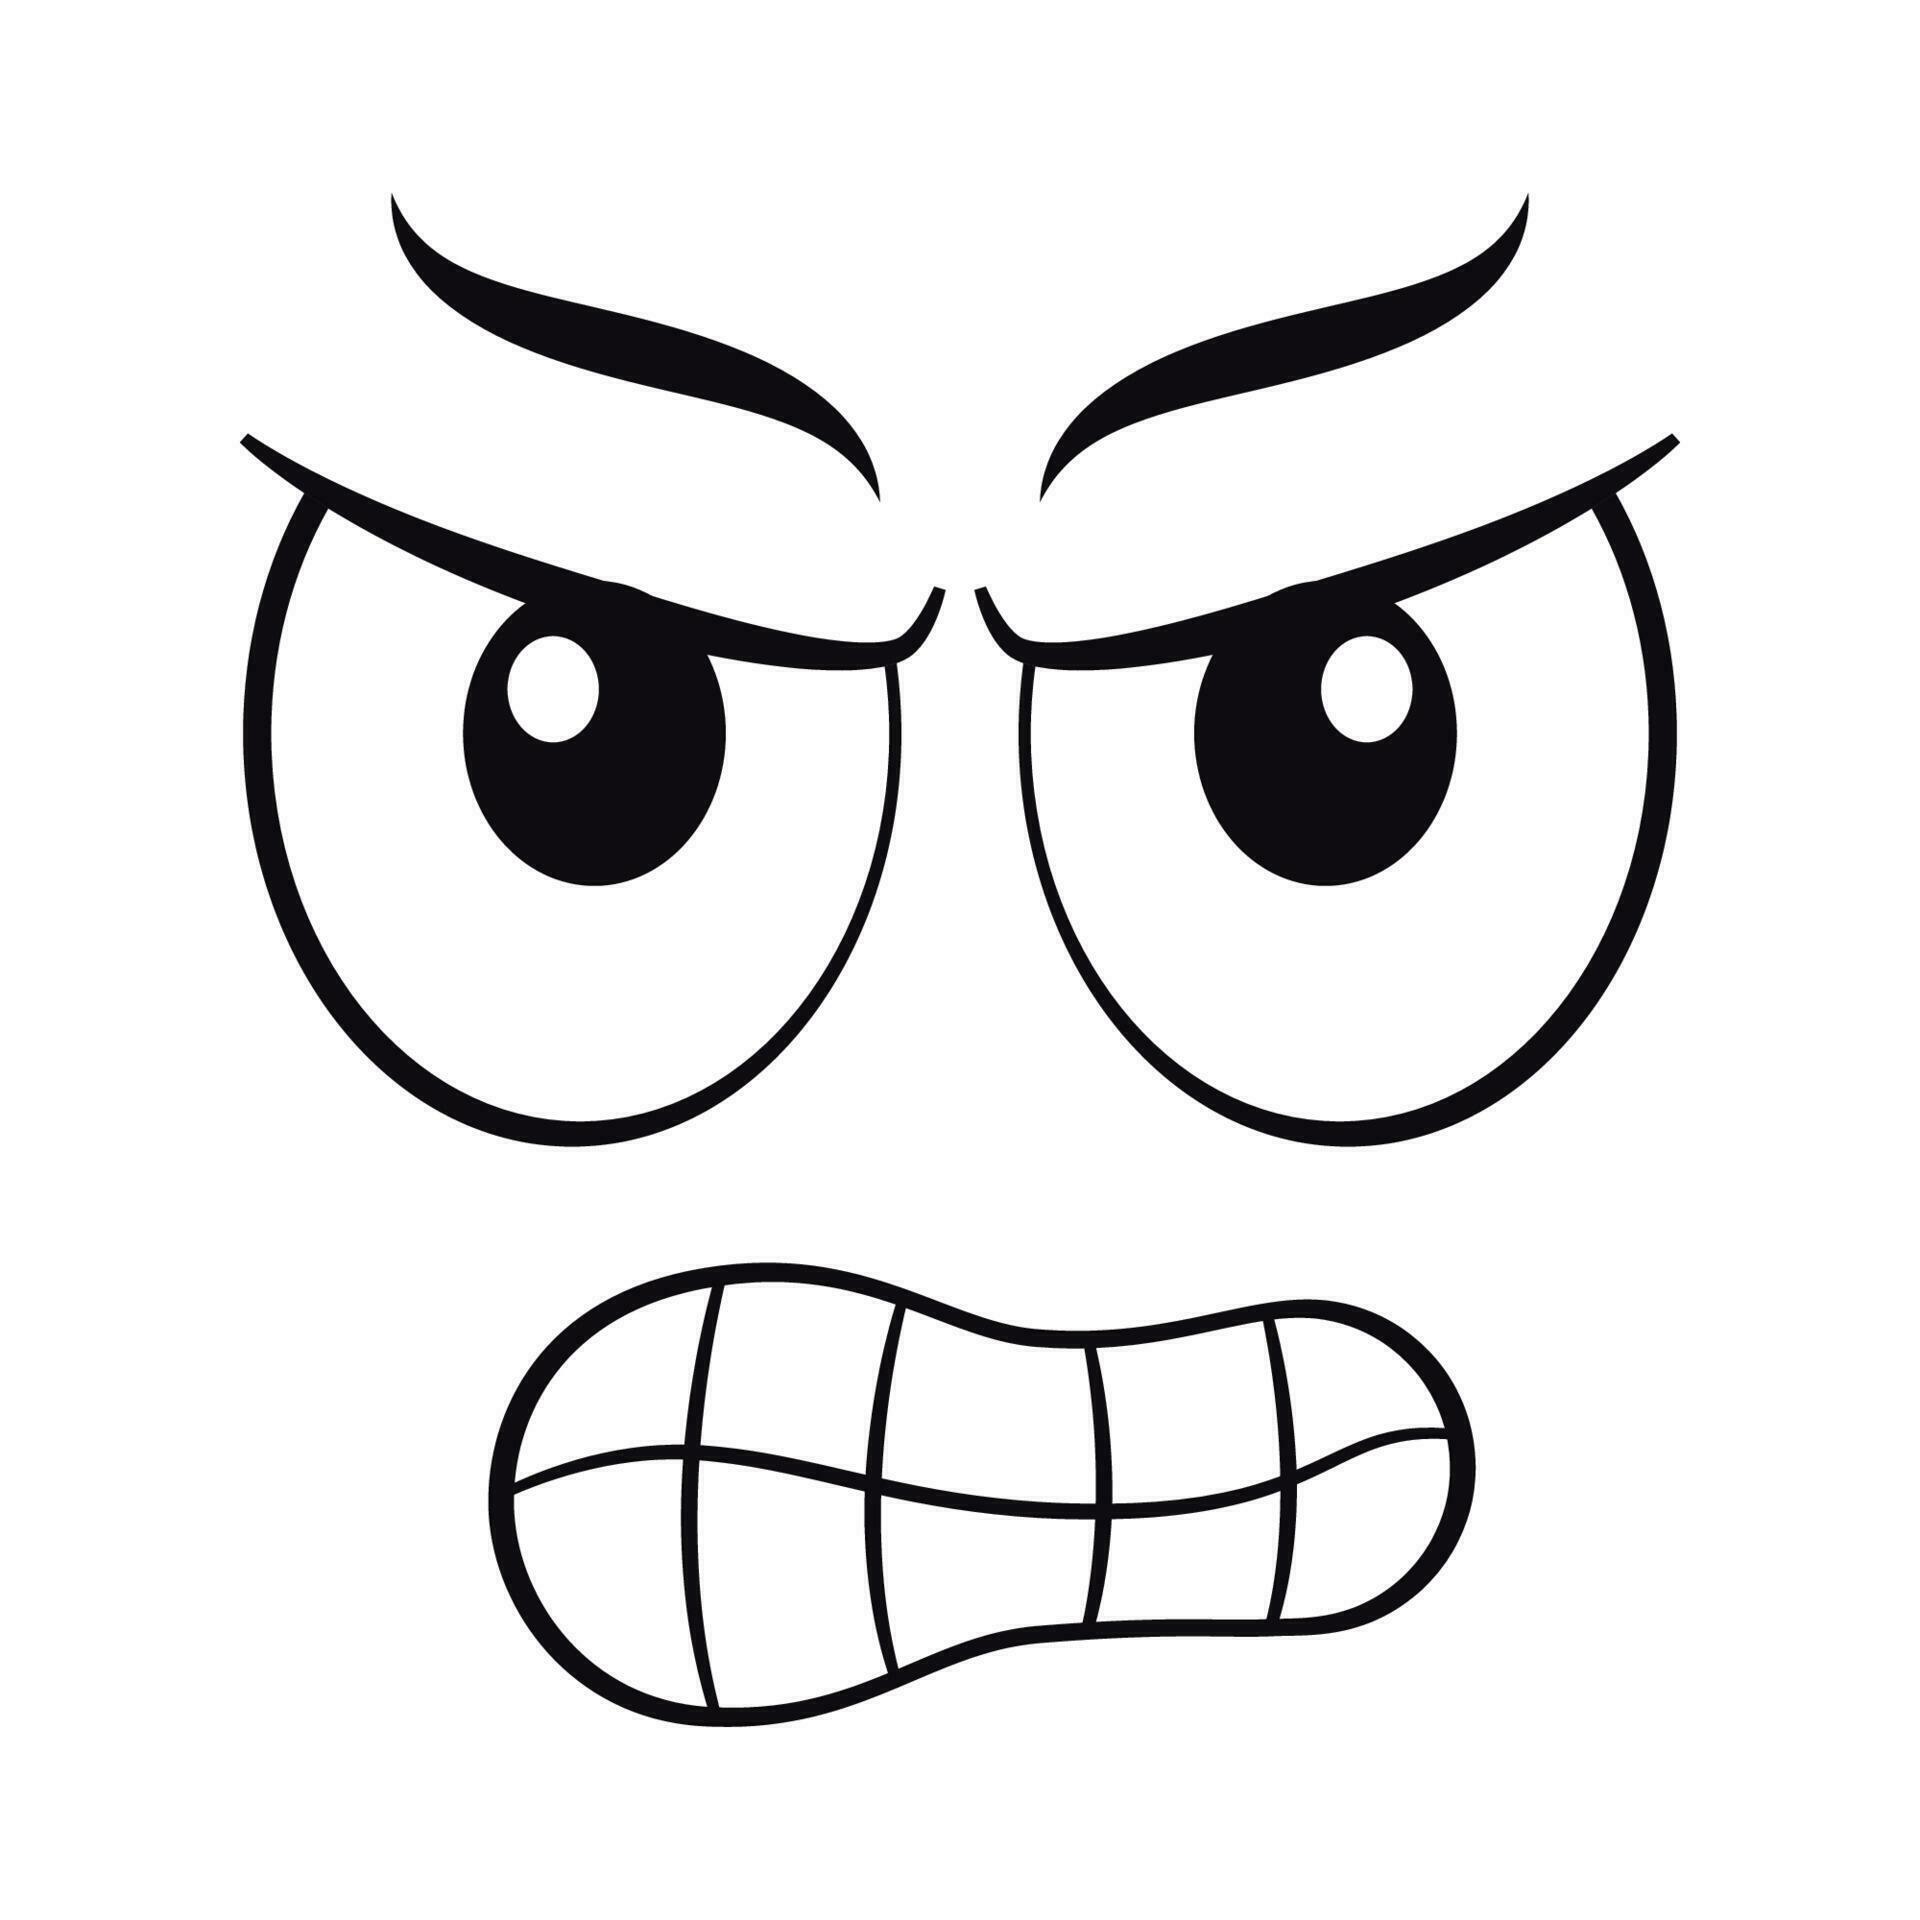 Cartoon angry face. Angry expression vector illustration. 24268935 ...